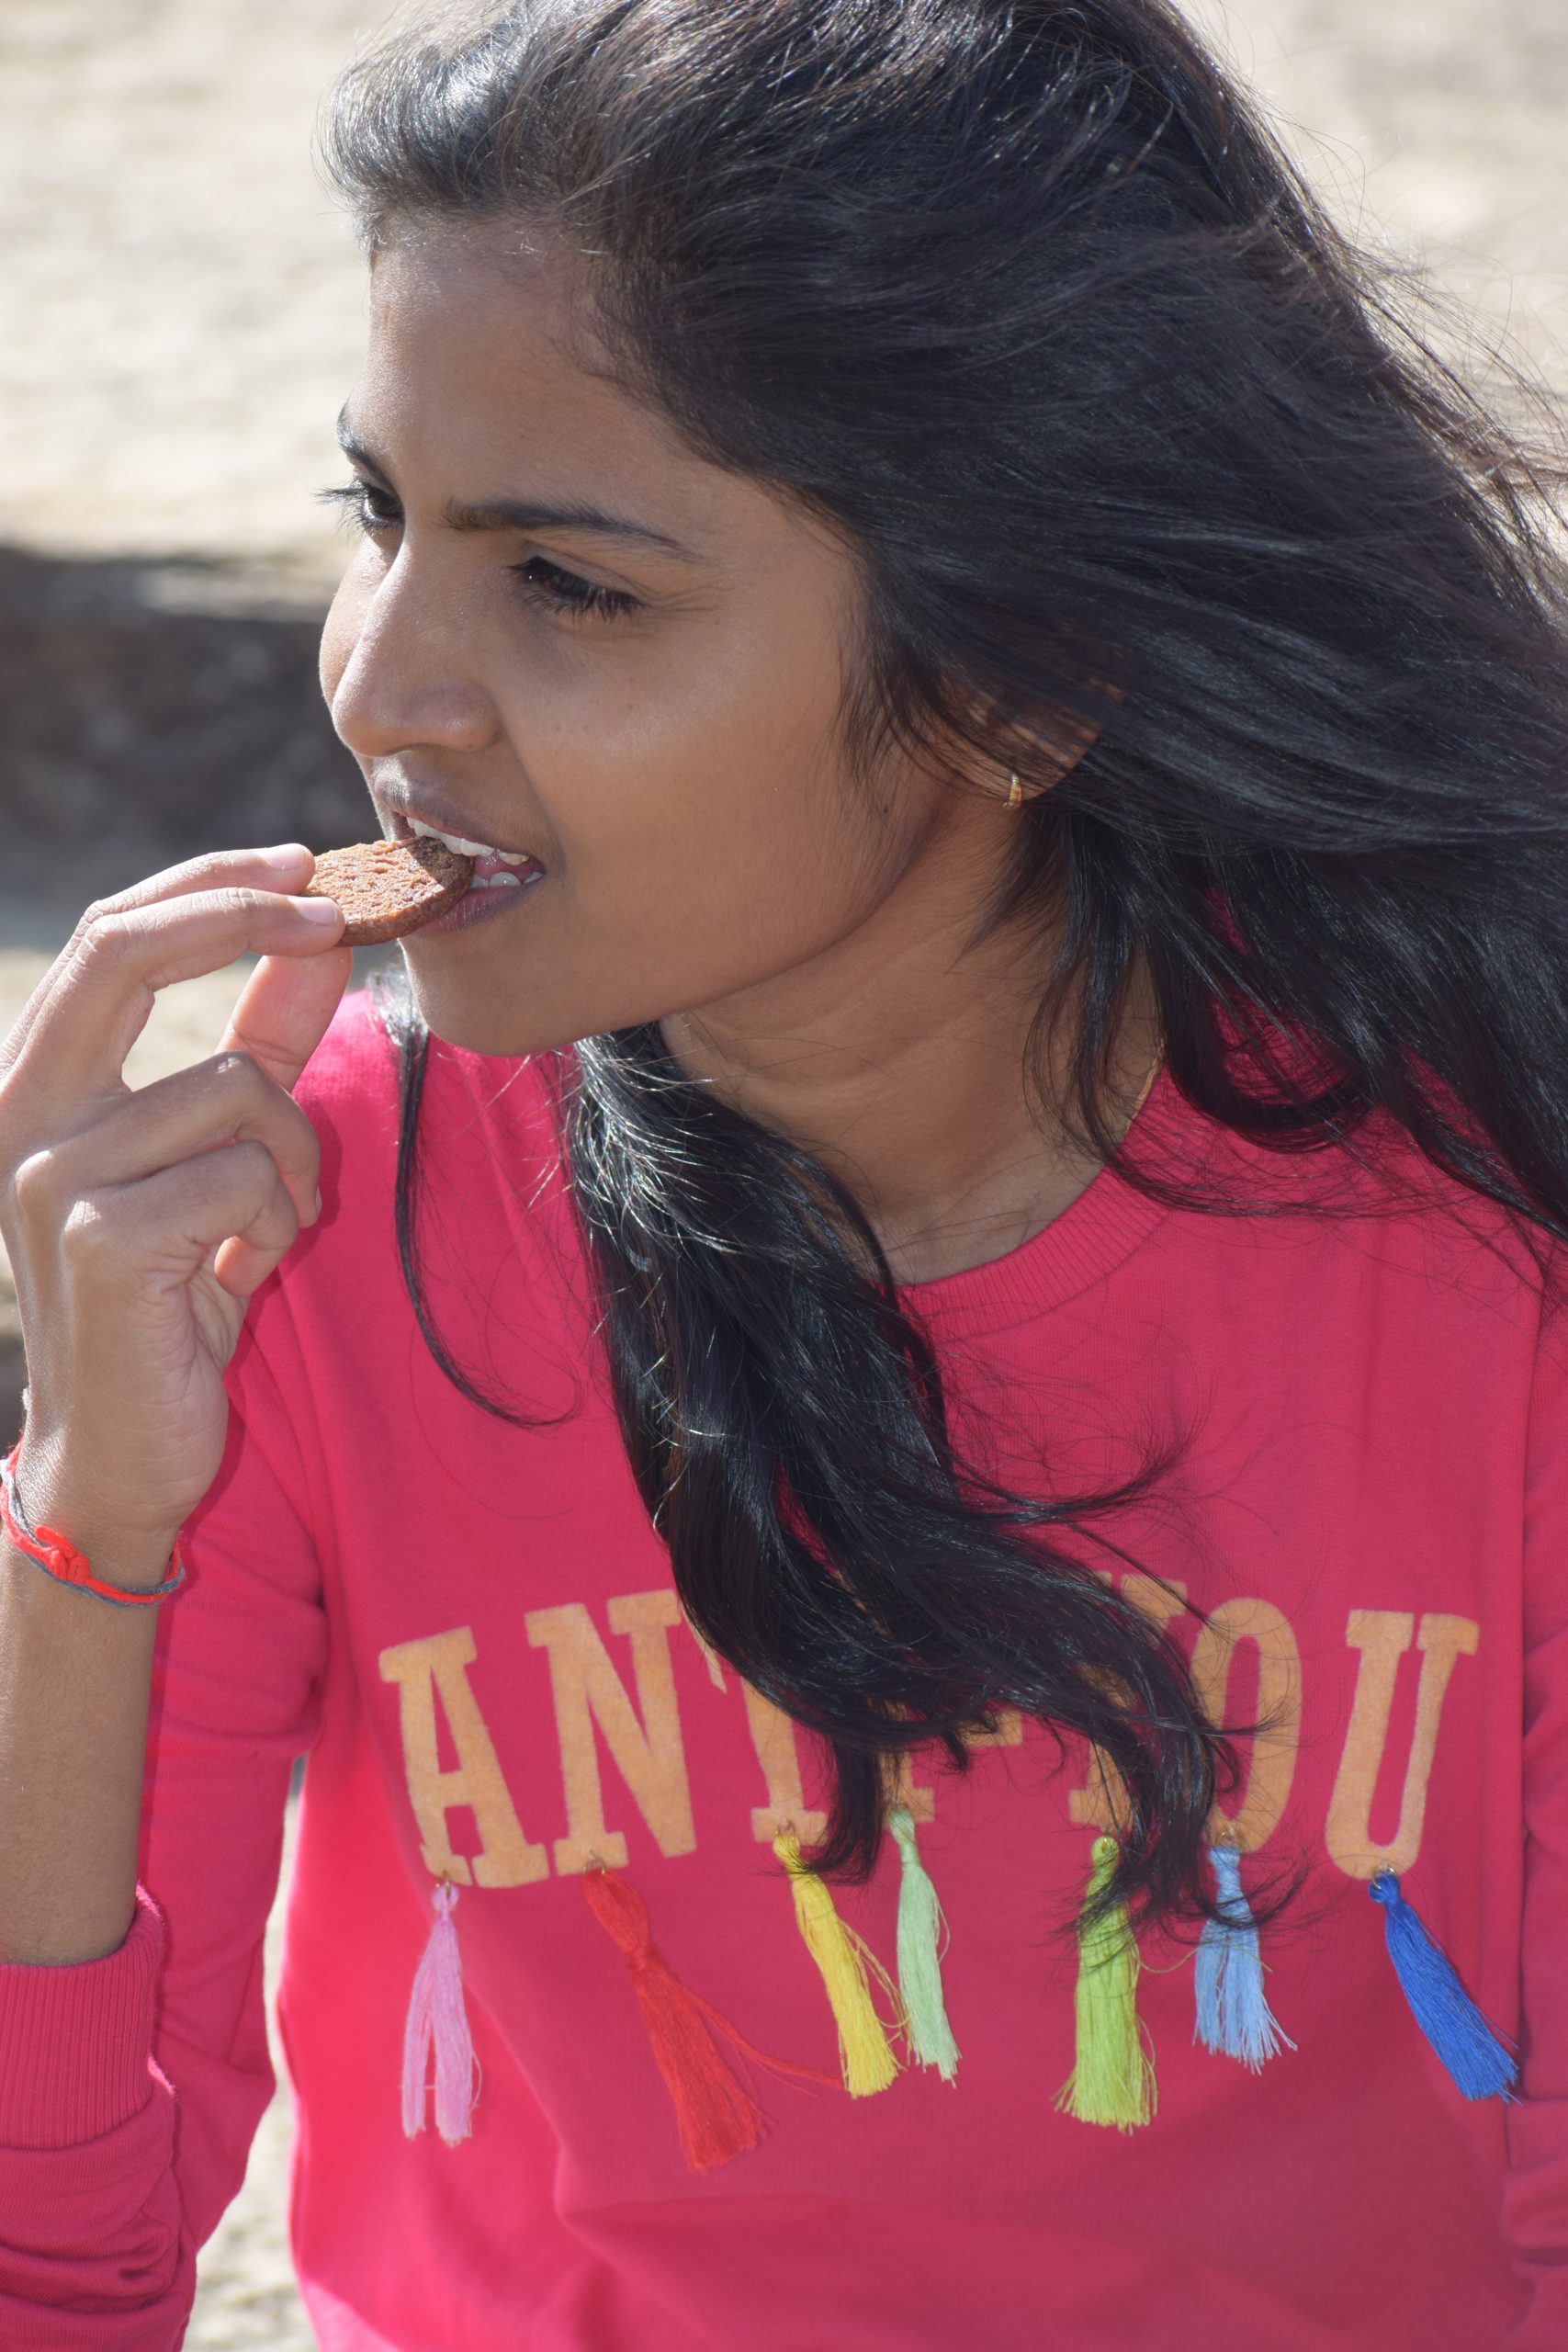 Girl eating biscuit